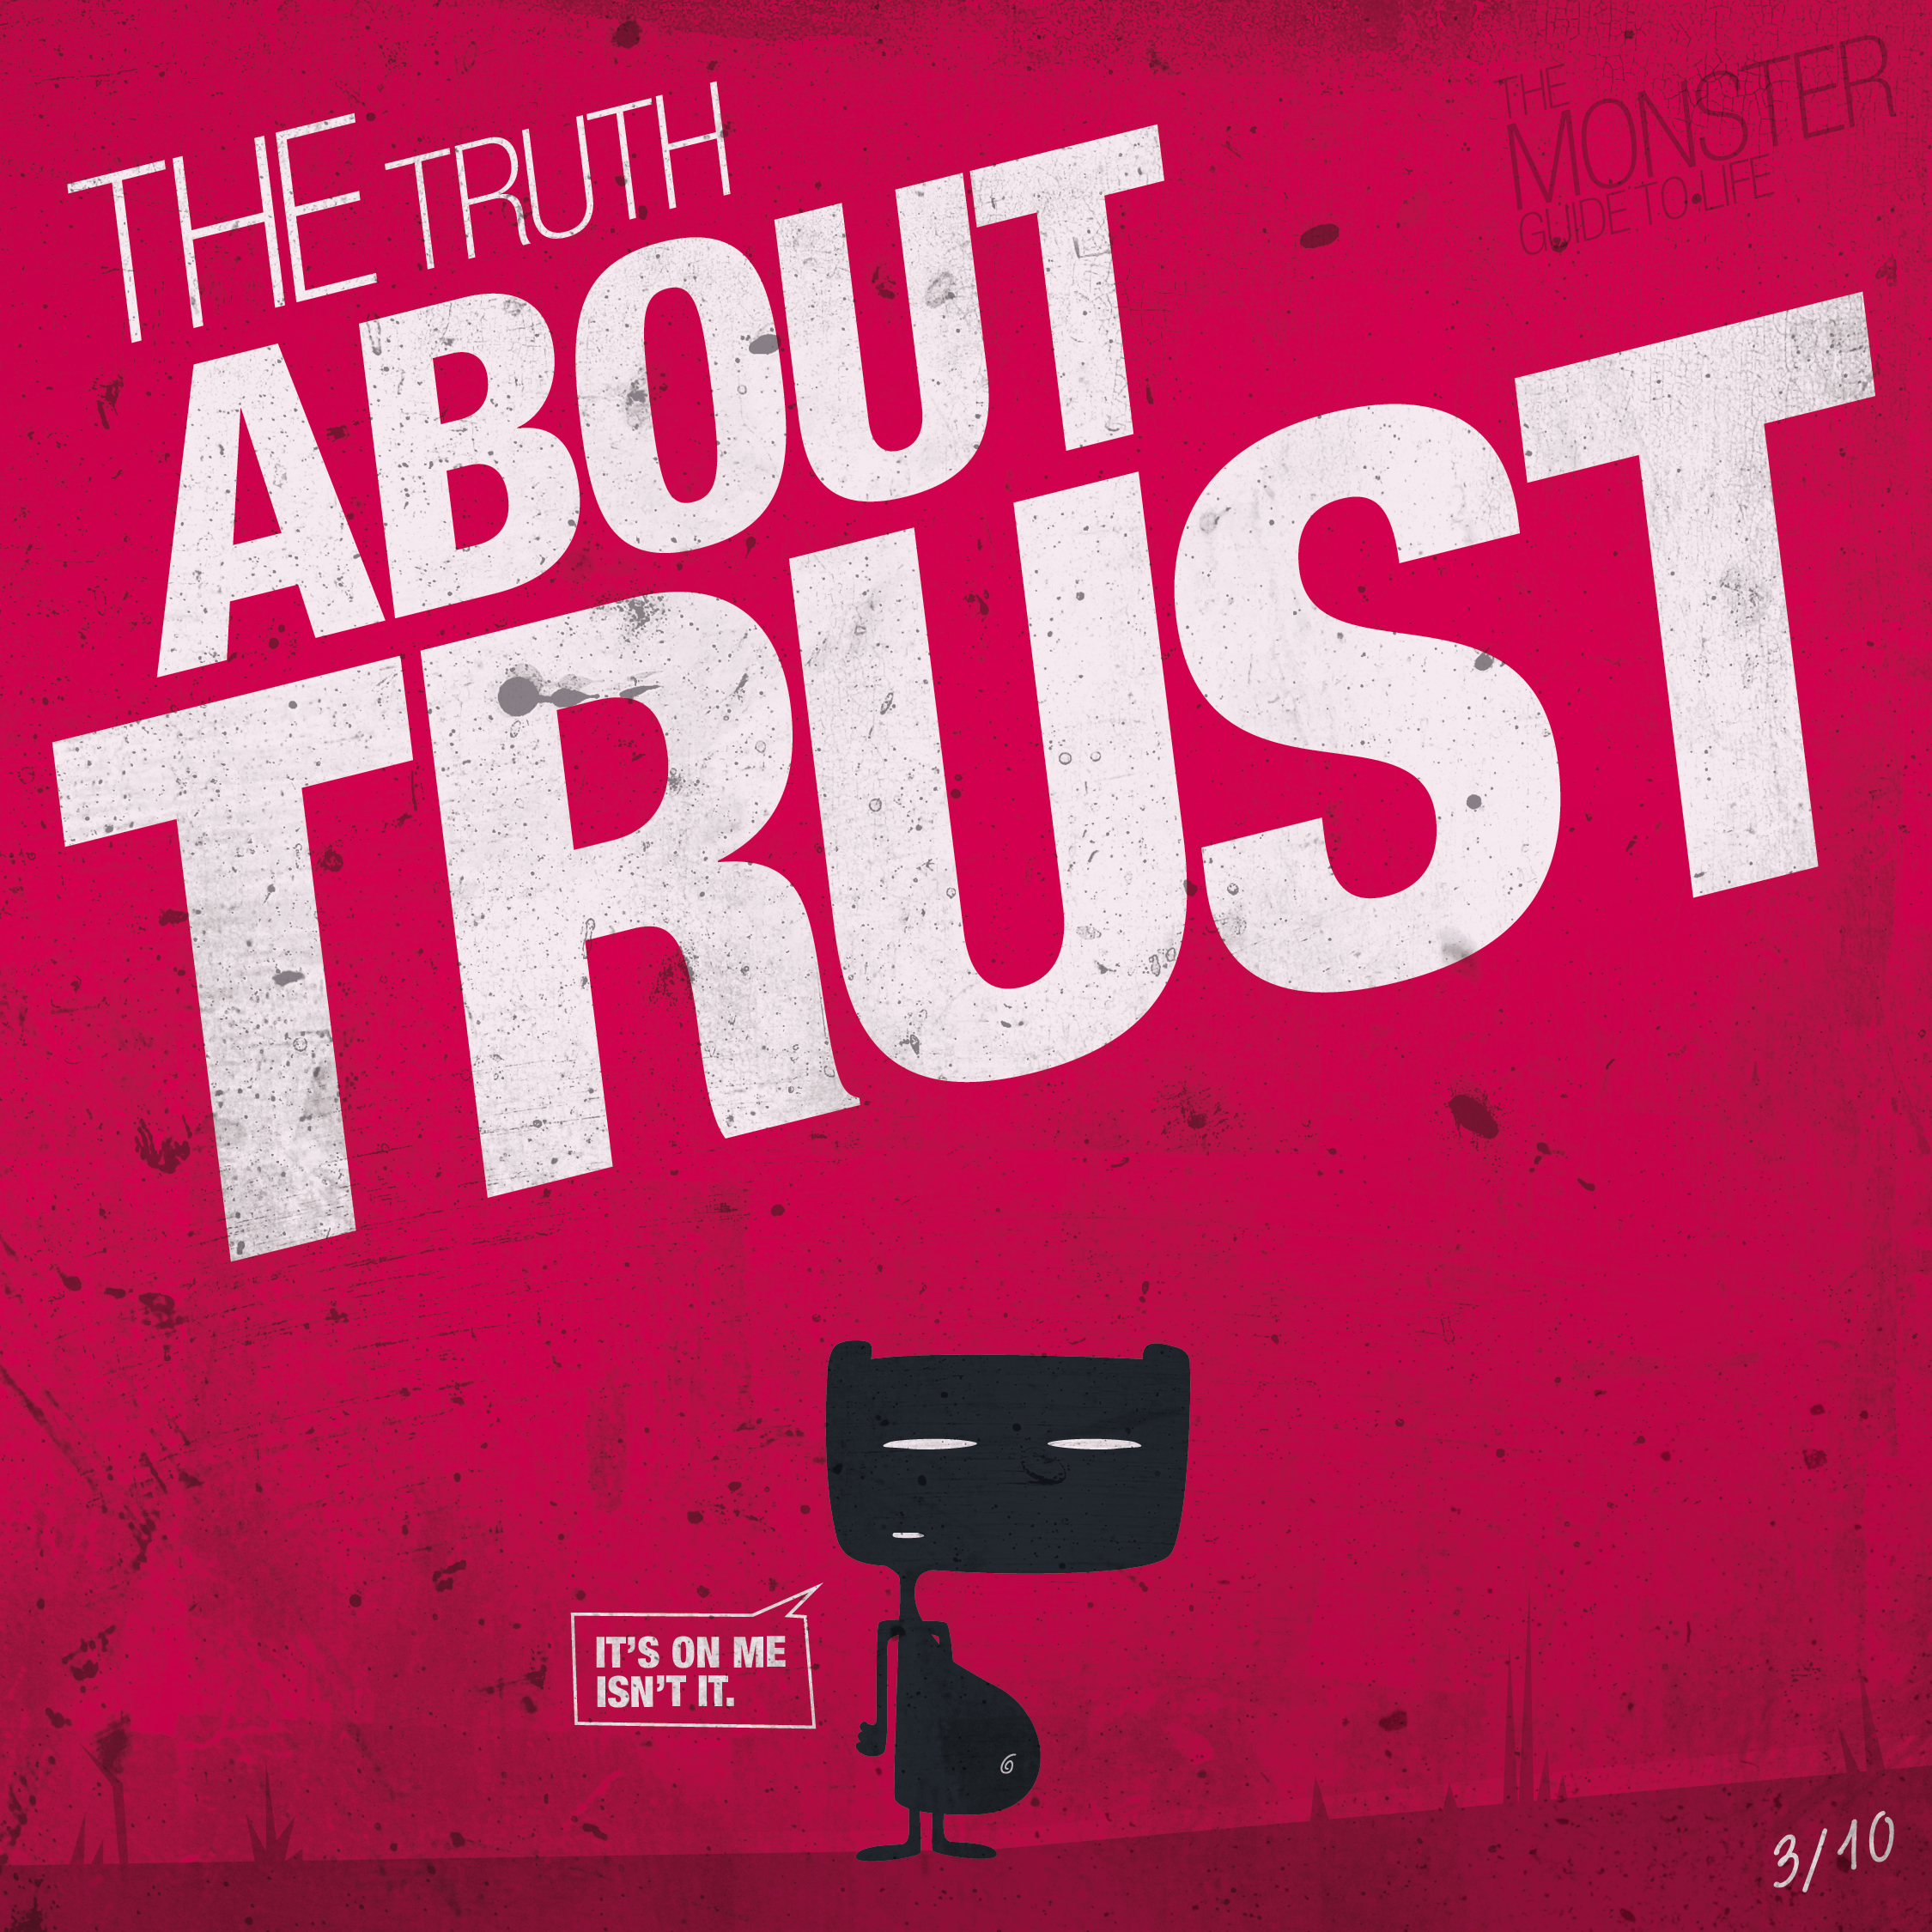 The truth about trust